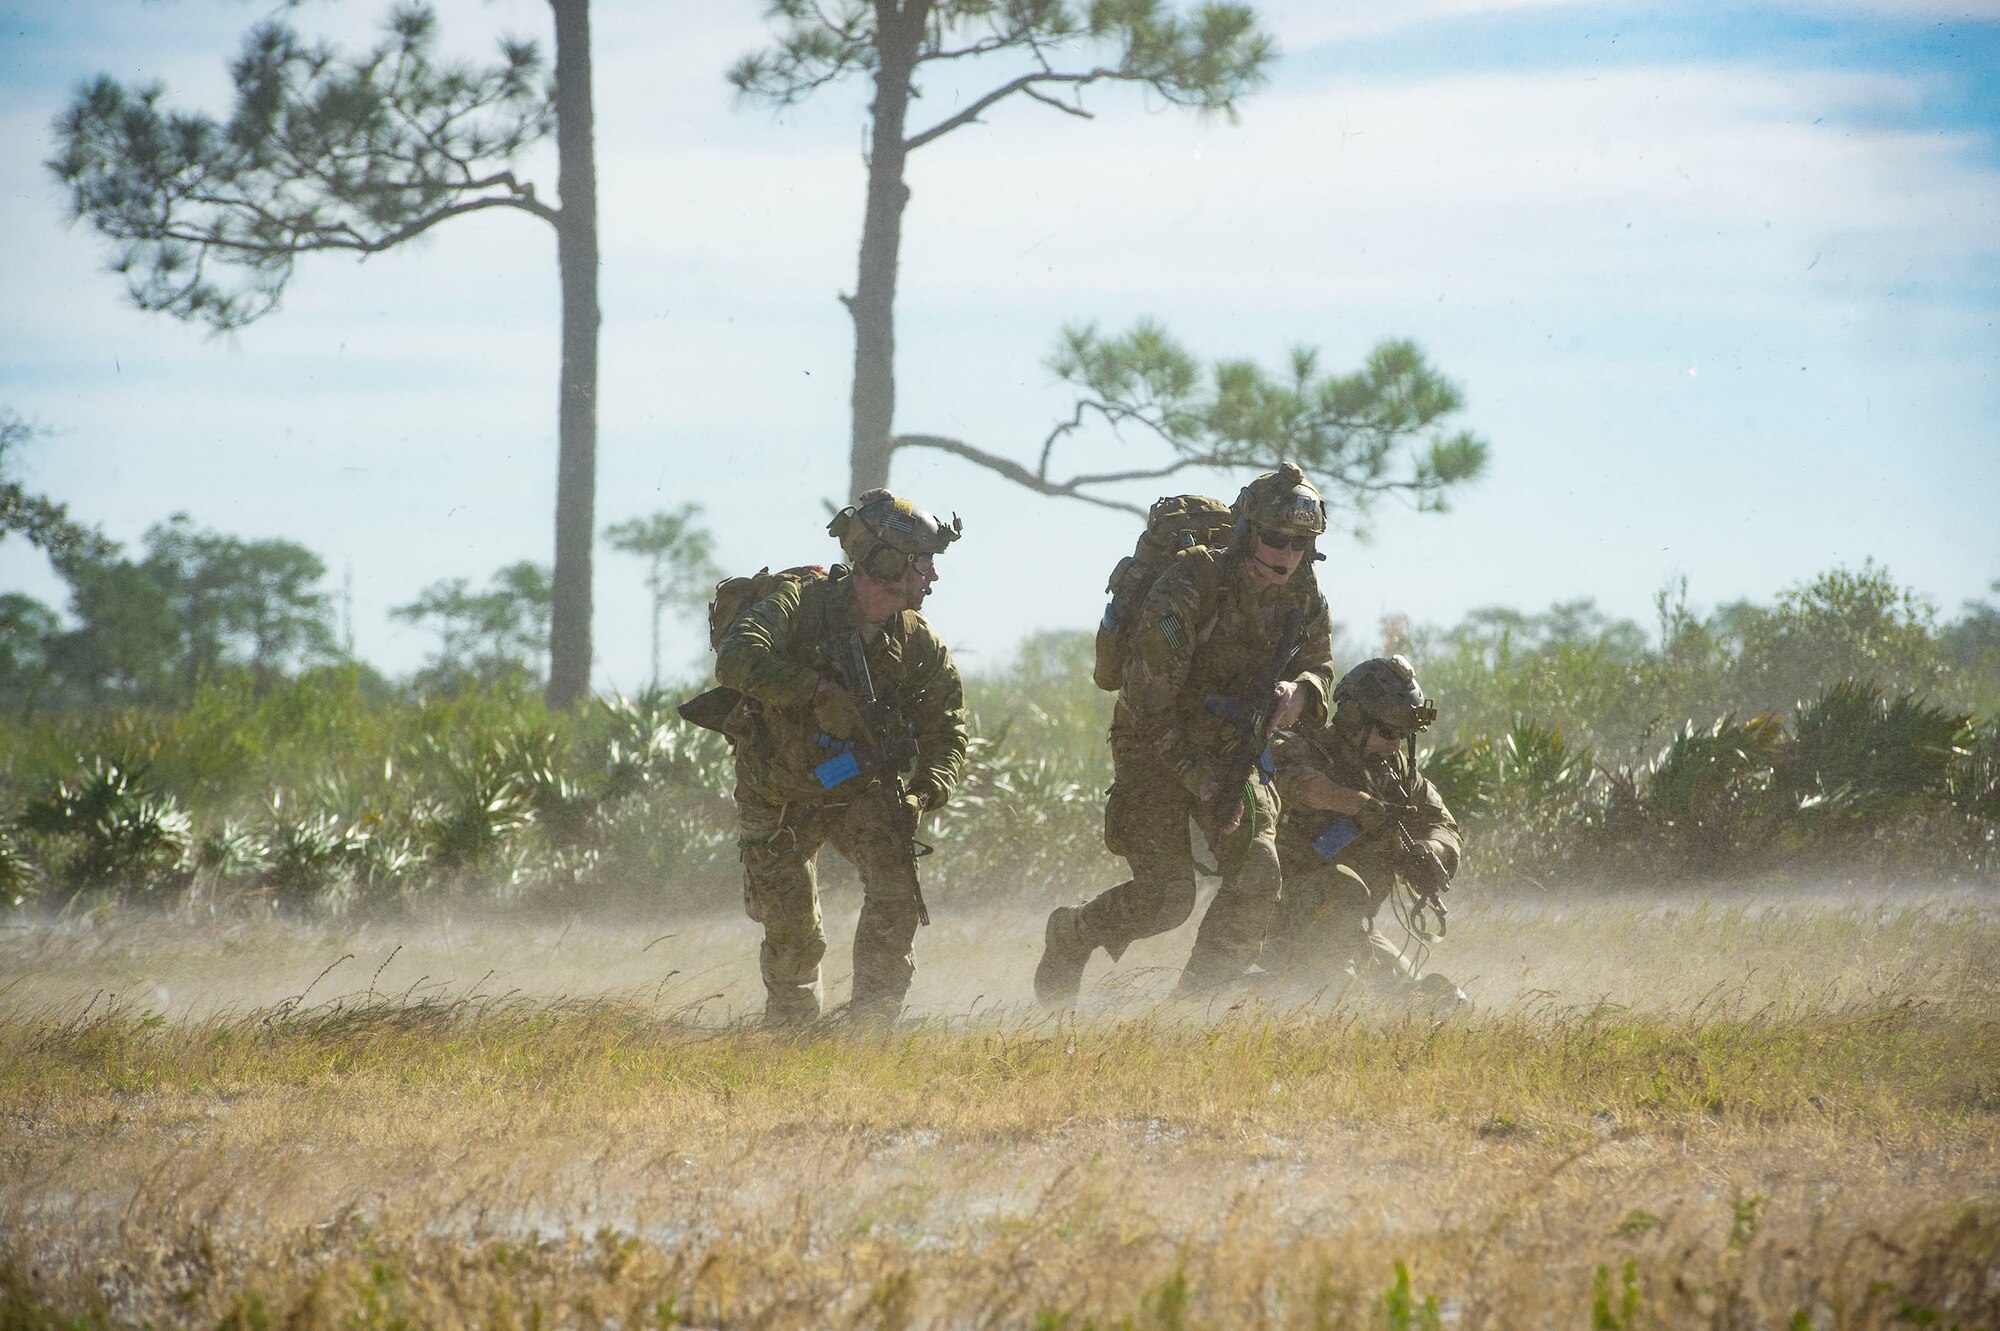 Pararescuemen from the 38th Rescue Squadron (RQS) advance a mock battlefield to rescue personnel during pre-deployment ‘spin-up’ training, Dec. 12, 2018, at Avon Park Air Force Range, Fla. During this pre-deployment ‘spin-up’ training, Moody’s 347th Rescue Group tested and maximized their combat search and rescue (CSAR) and personnel recovery capabilities. Under normal circumstances, the HH-60G Pave Hawk helicopter crews and maintainers deploy from Moody and integrate with Guardian Angel teams from different bases. This time, Moody’s 38th RQS and 41st RQS’s will deploy together and utilized this exercise to improve their mission readiness and cohesion before their departure. (U.S. Air Force photo by Senior Airman Greg Nash)